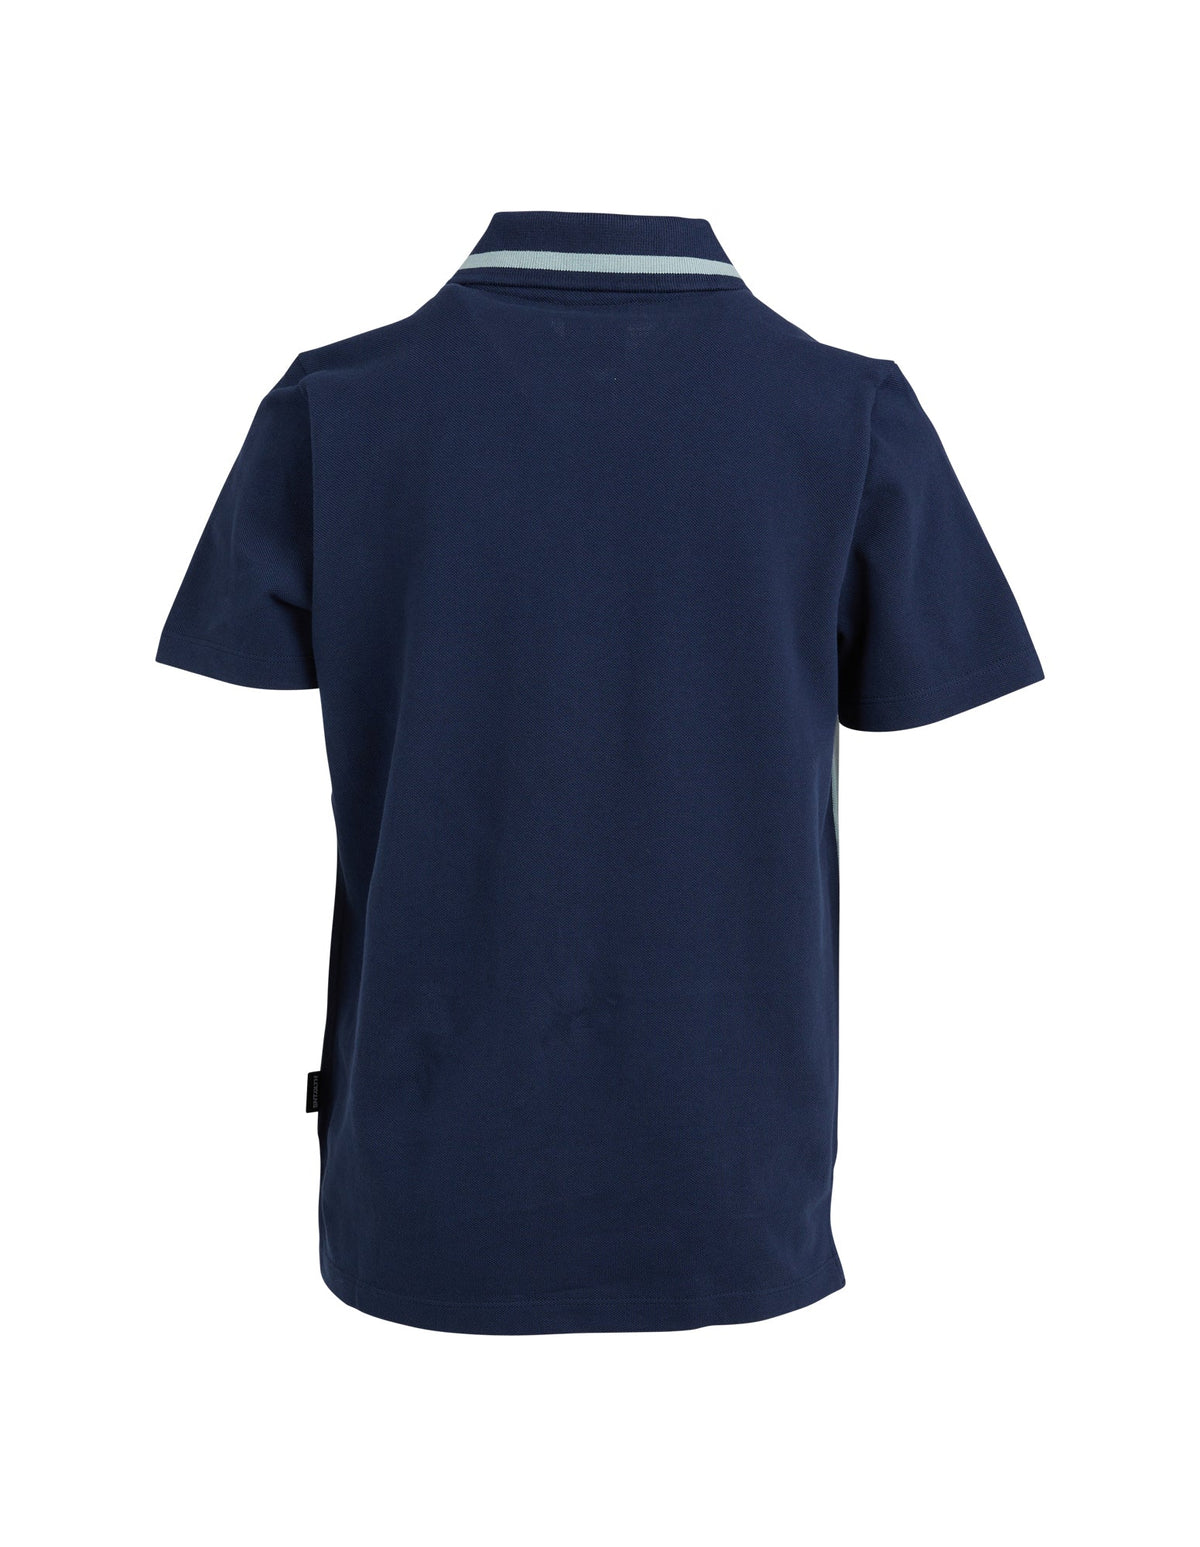 St Goliath 3-7-Kids Clubhouse Polo Navy-Edge Clothing